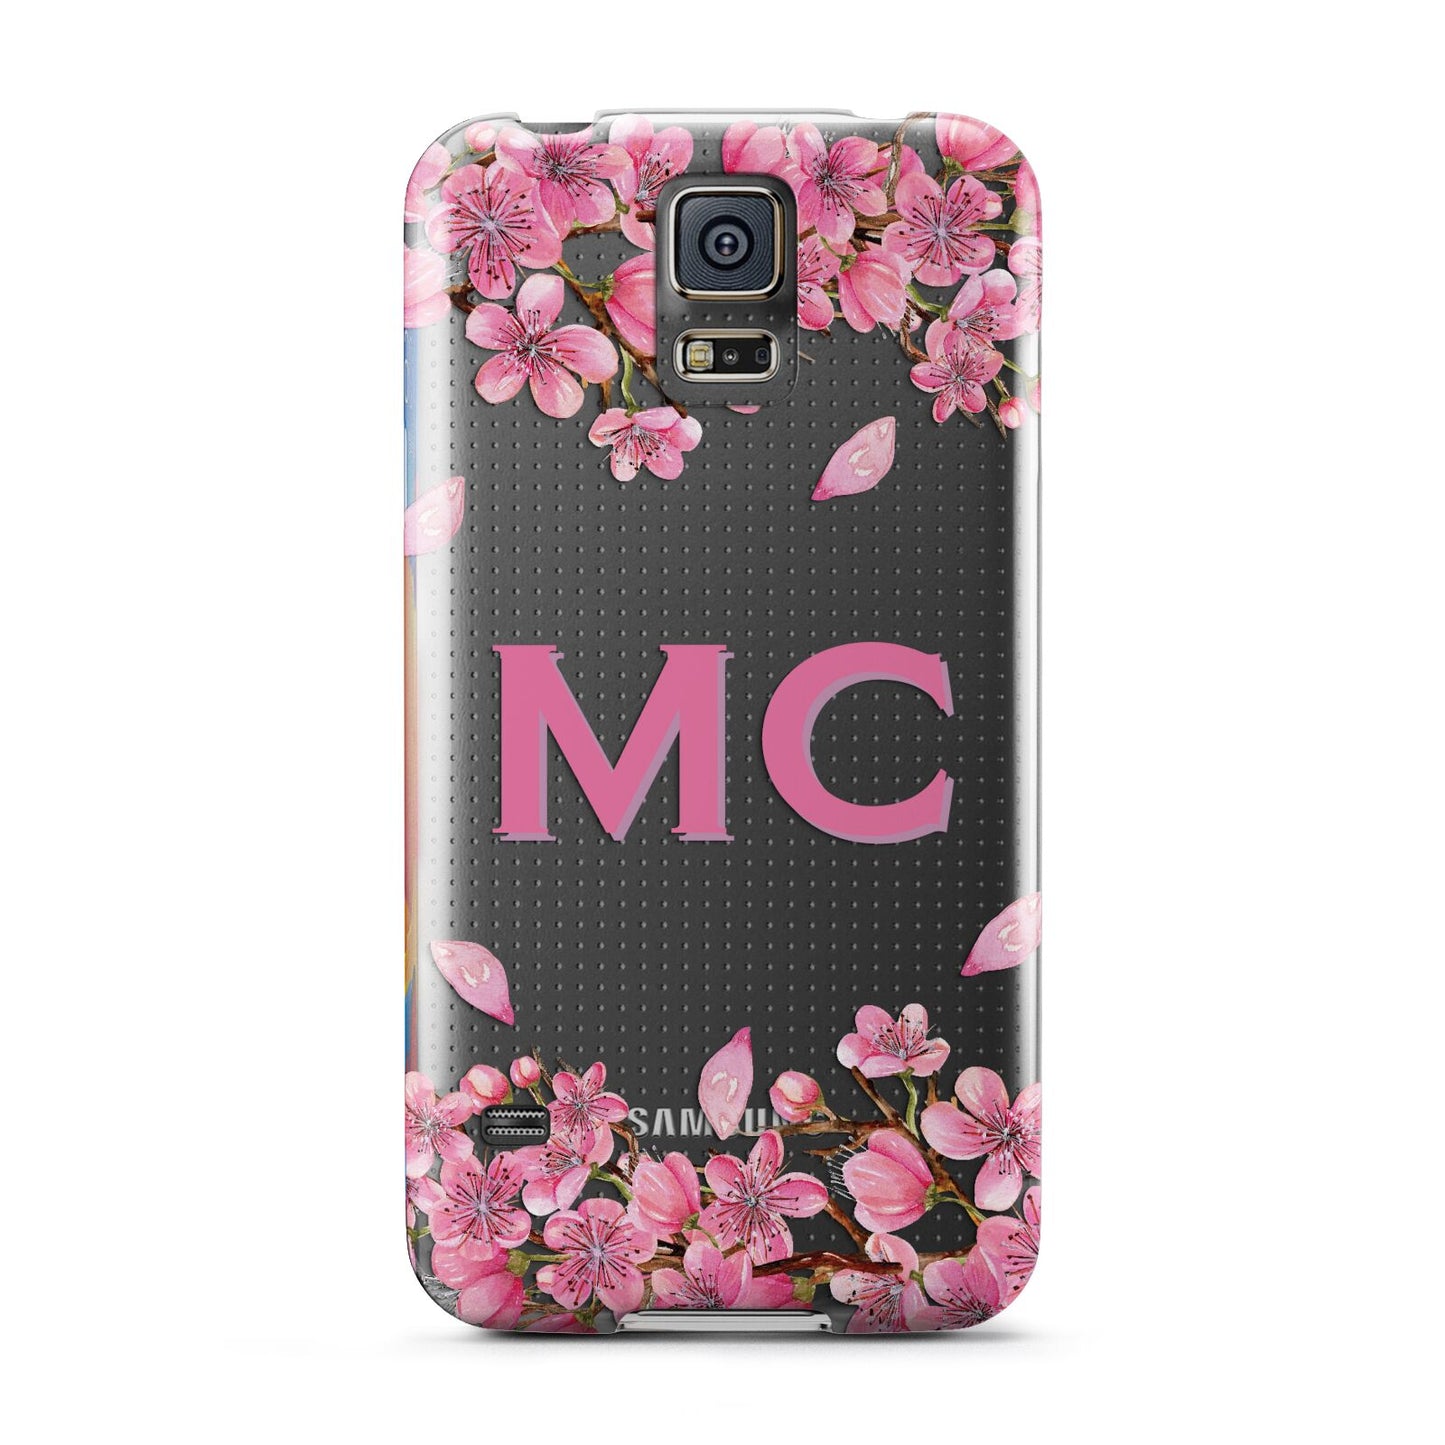 Personalised Vibrant Cherry Blossom Pink Samsung Galaxy S5 Case